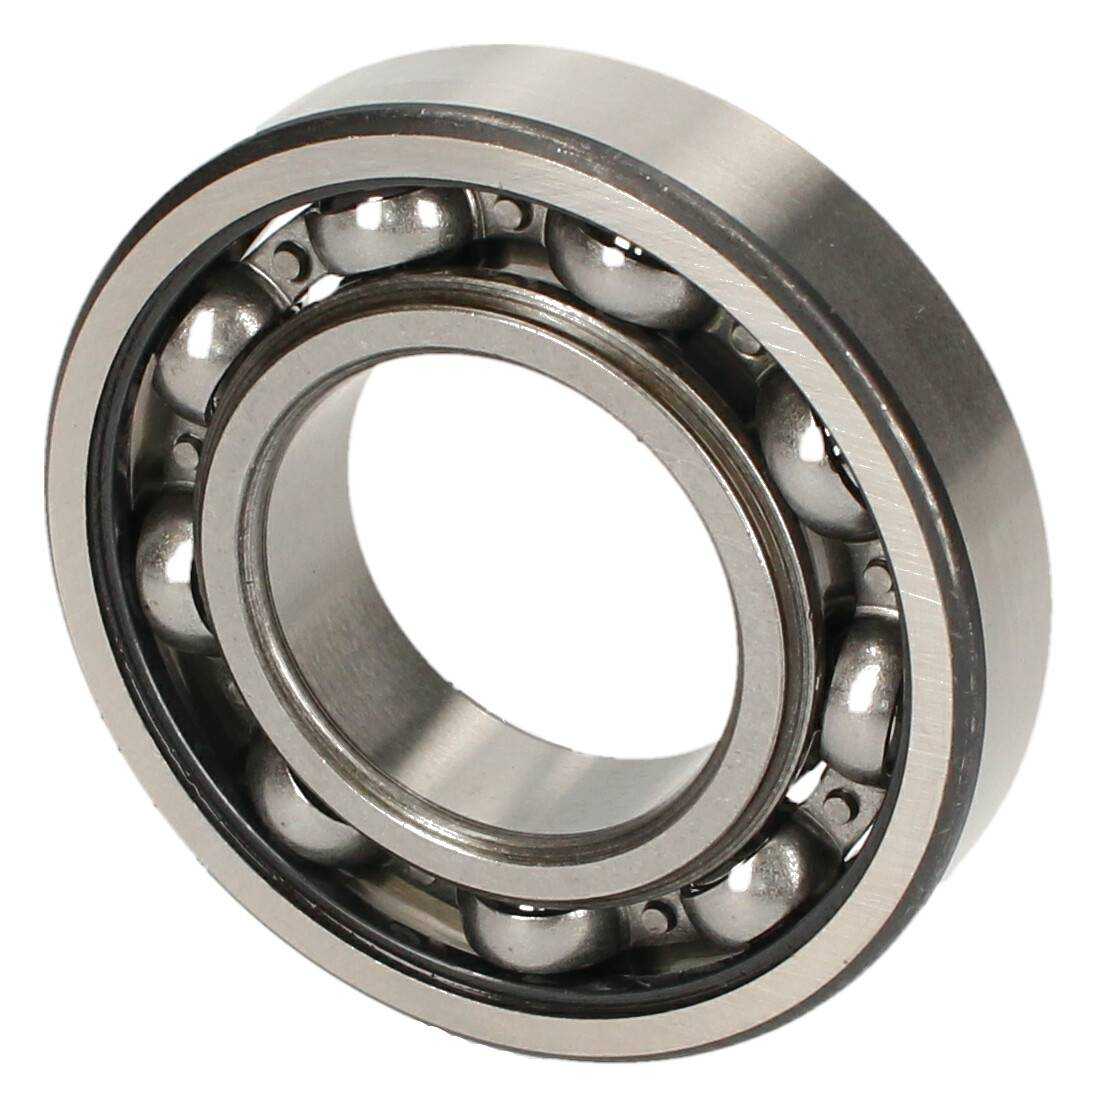 BALL BEARING 6310-C3 FAG (WITHOUT PACKAGING) - Image 1